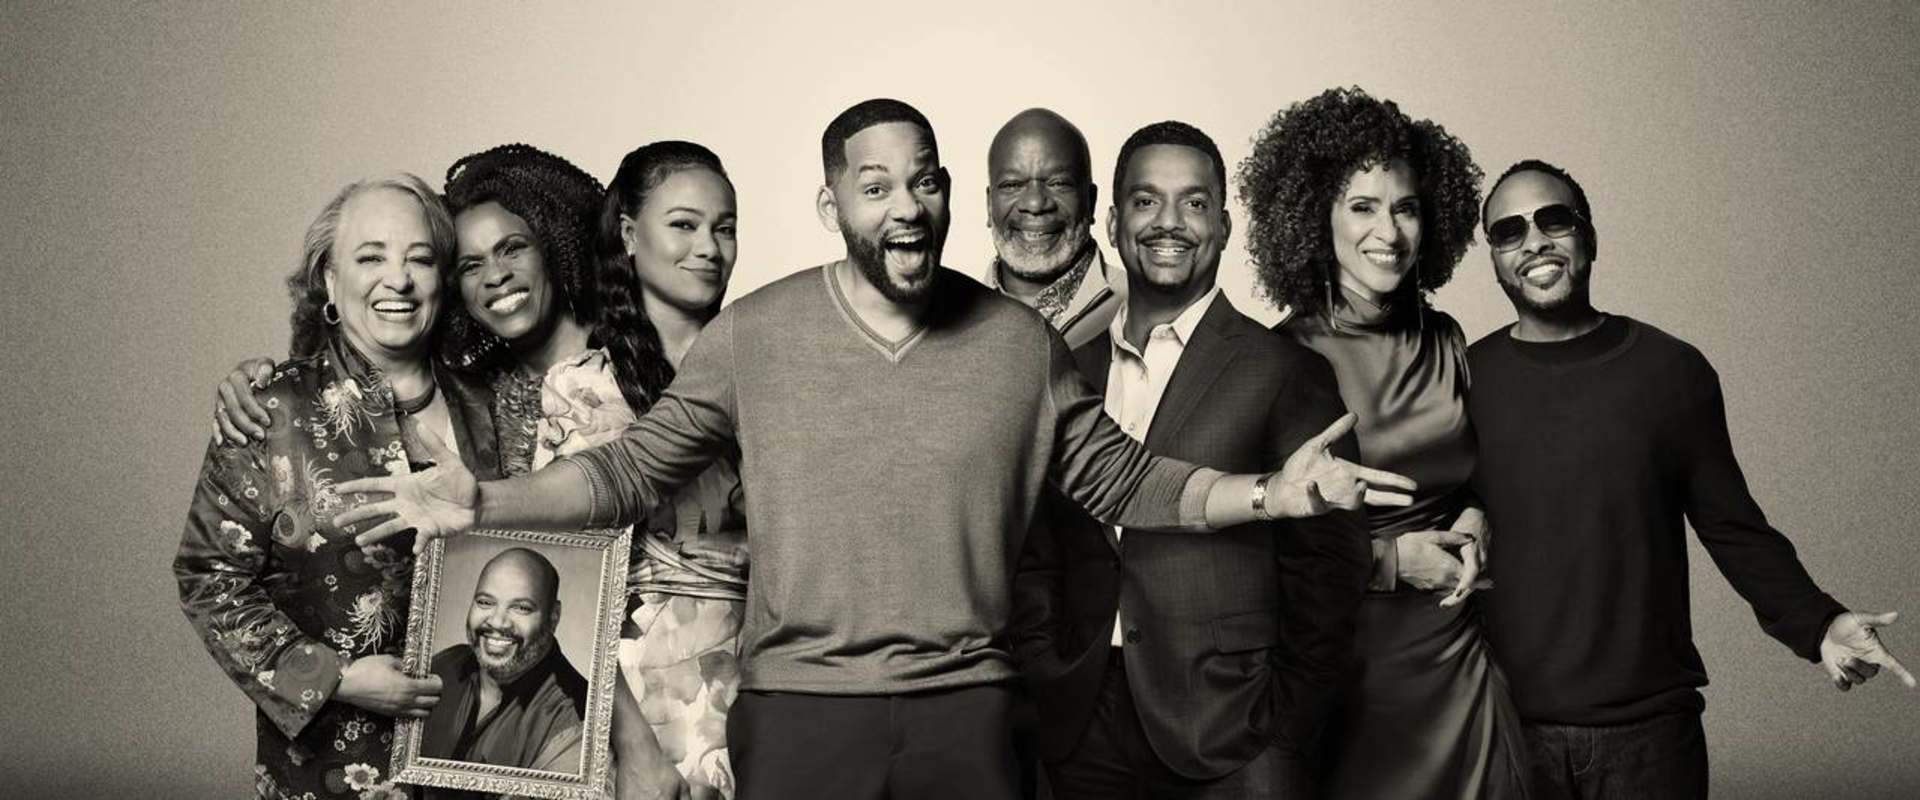 The Fresh Prince of Bel-Air Reunion Special background 2